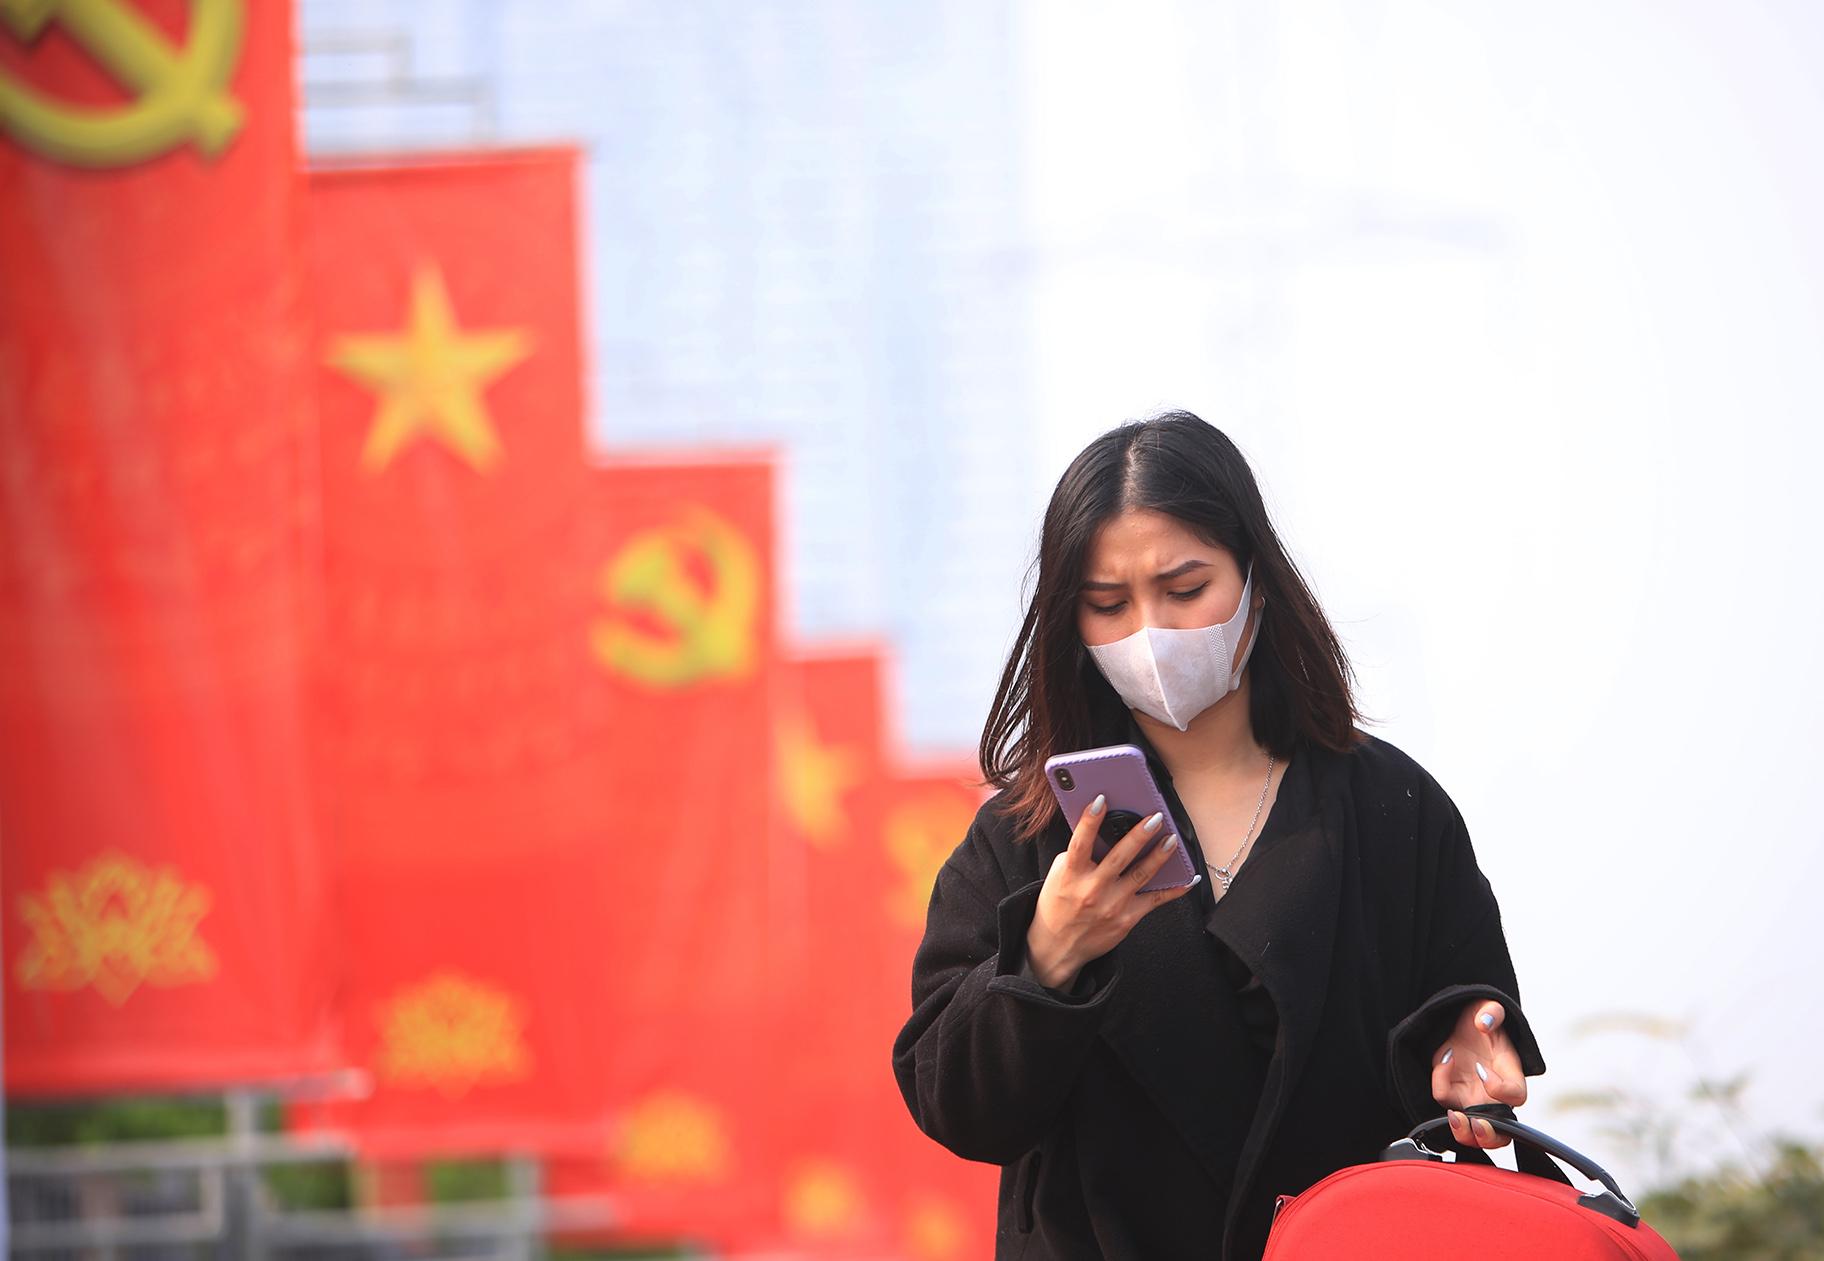 In this Jan. 23, 2021 file photo, a woman wearing face mask looks at her phone in Hanoi, Vietnam. (AP Photo / Hau Dinh, File)